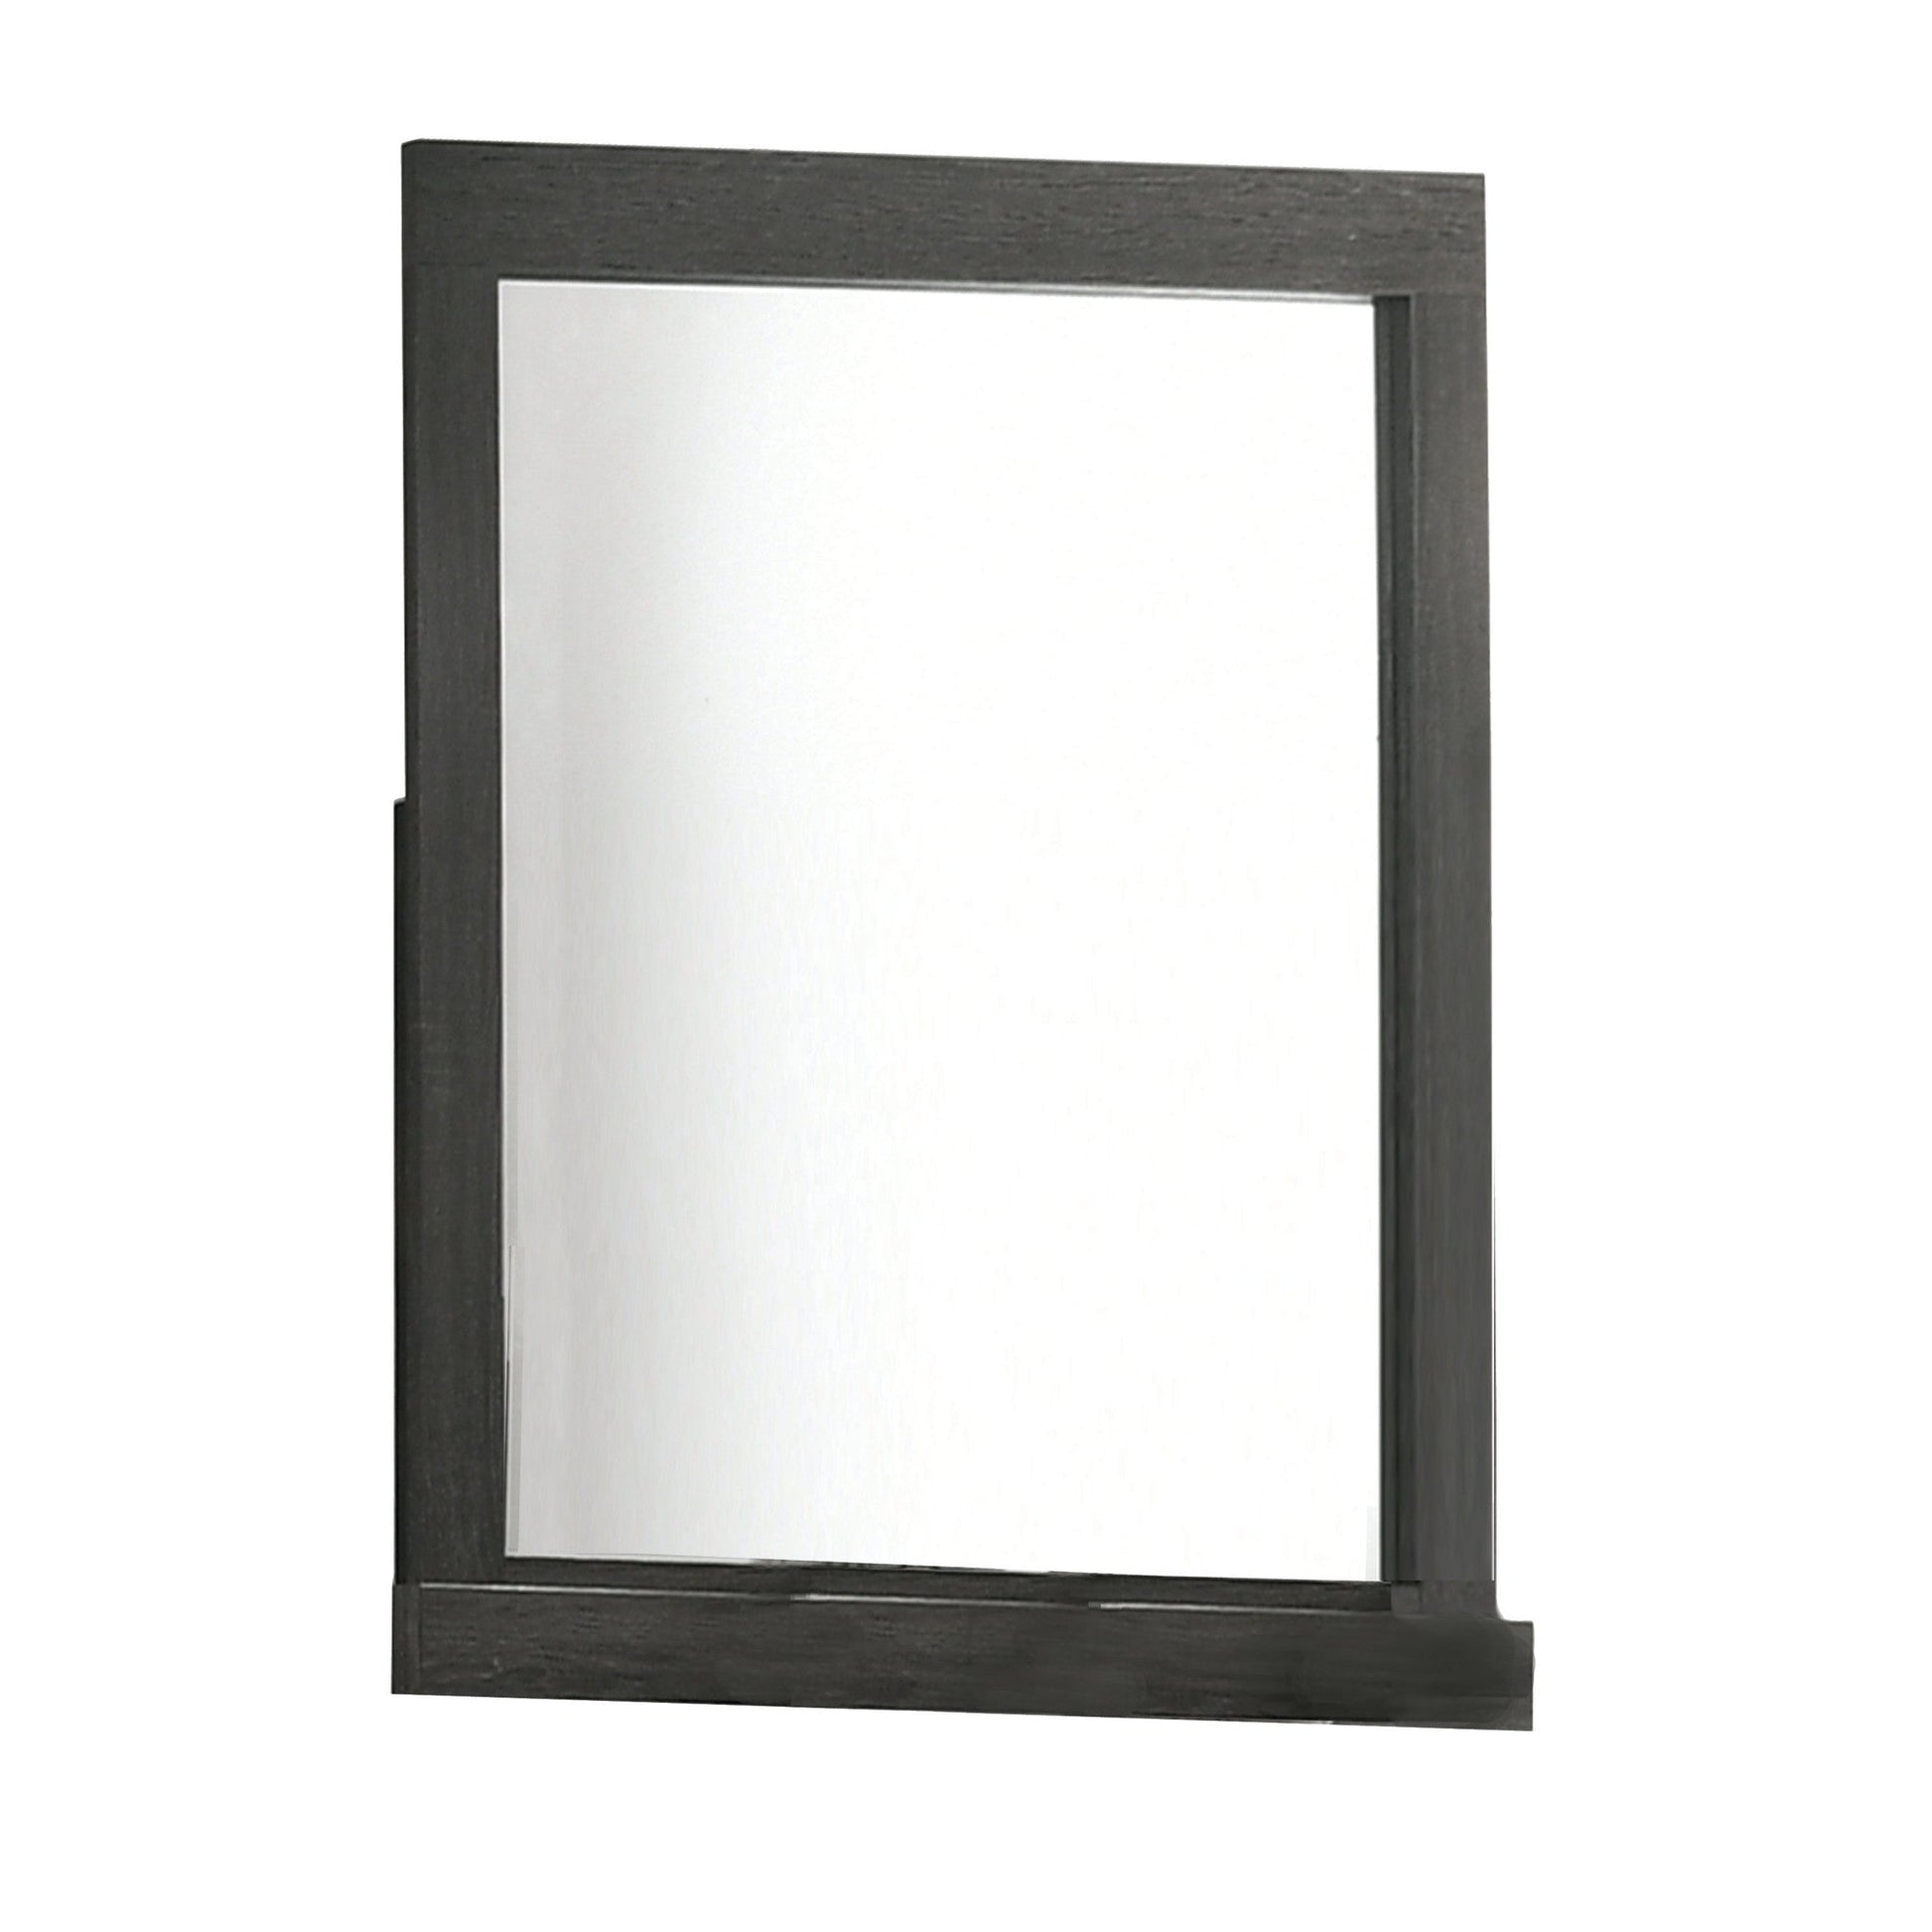 Benzara Gray and Silver Rectangular Wooden Framed Mirror With Beveled Edges